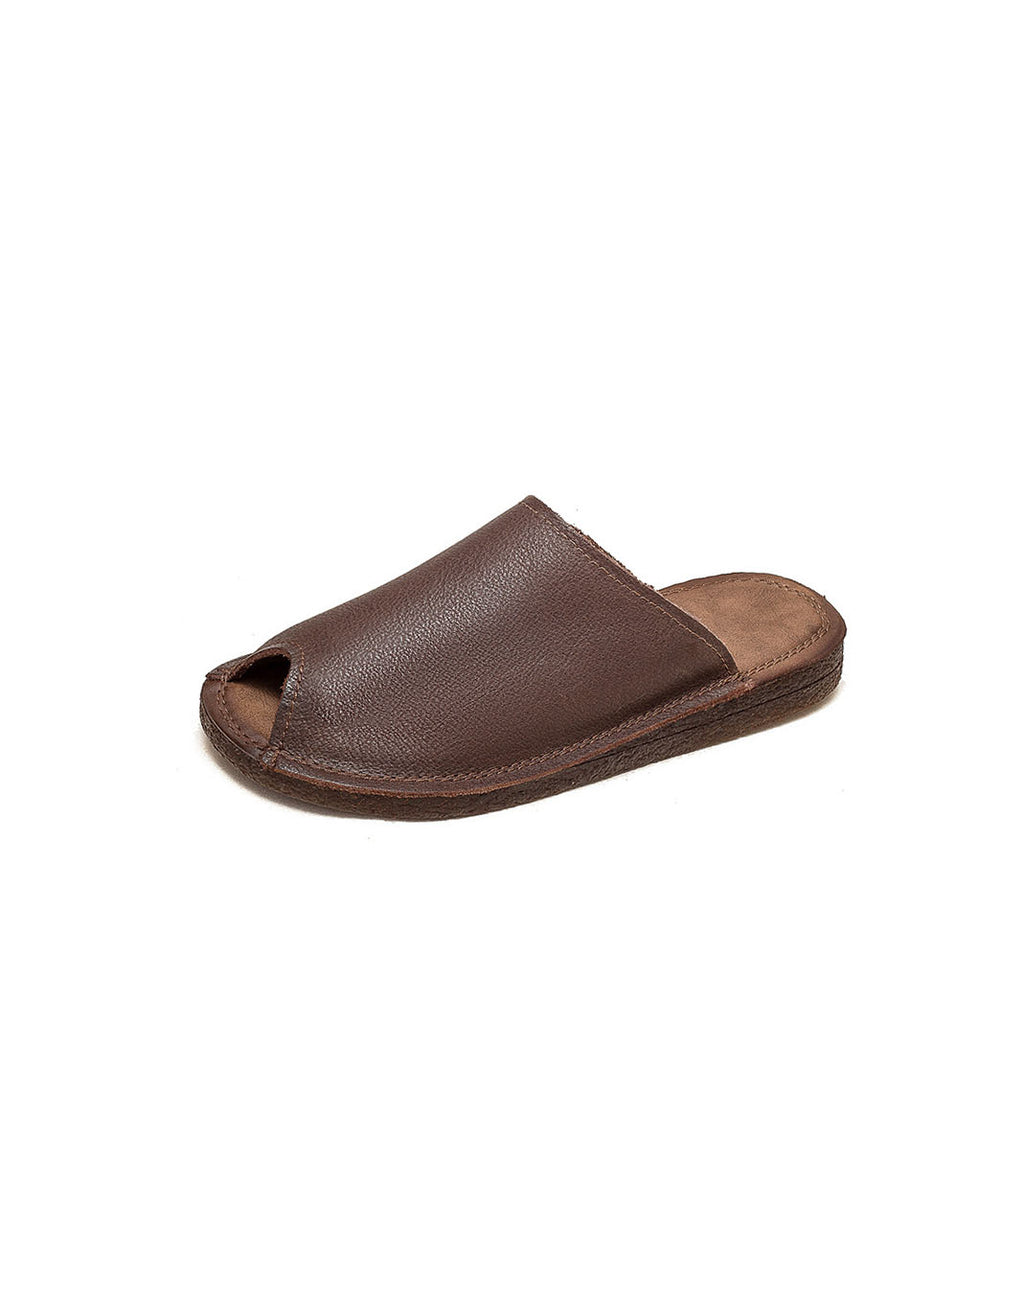 Women's Comfortable Leather Slippers | Mules — Obiono